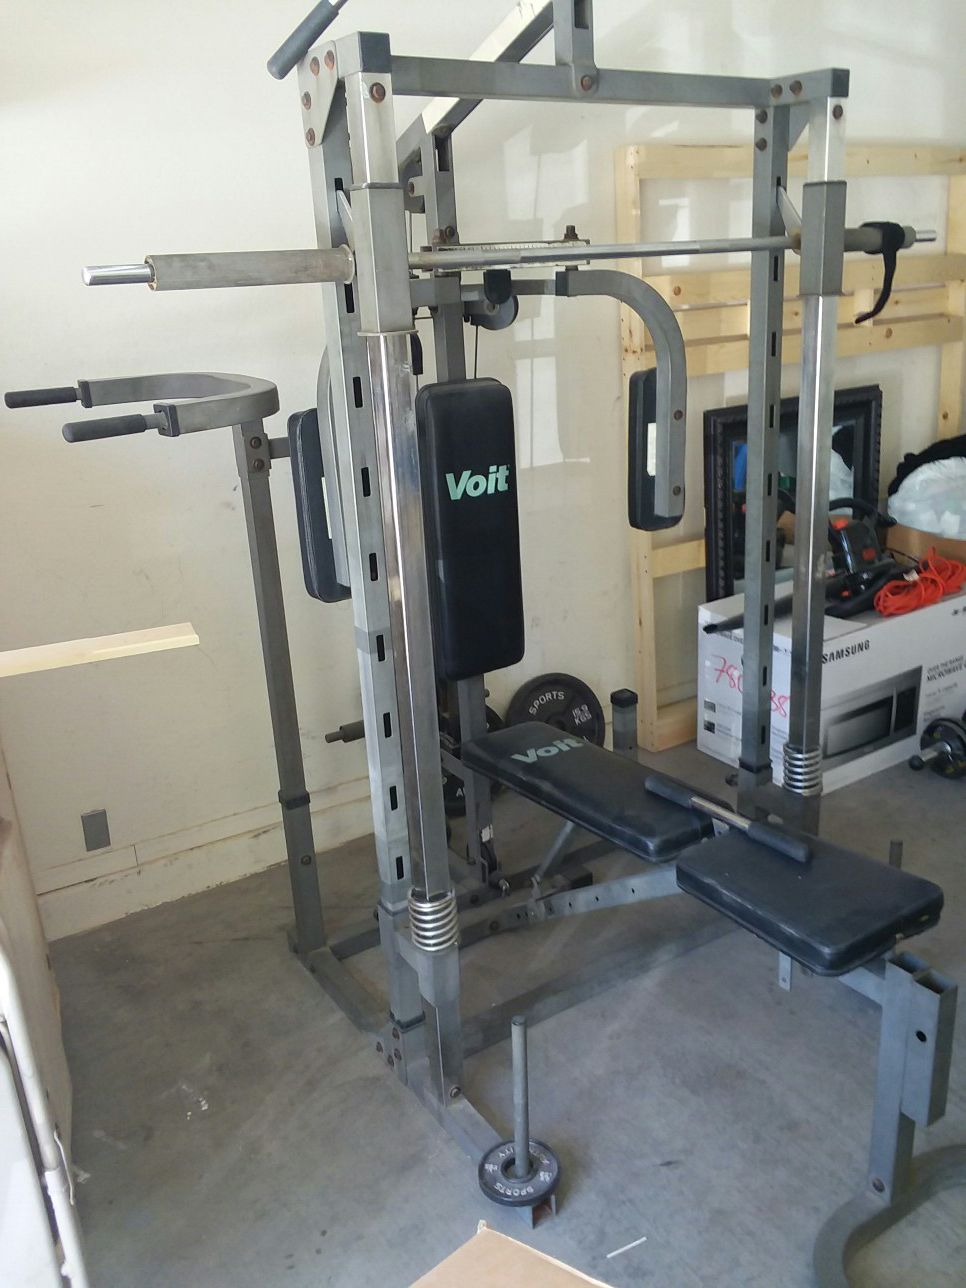 220lbs of Olympic weights Home gym set Decent shape, everything works, Lat bar 2 dumbbell bars 2 curl bars ... se abla español